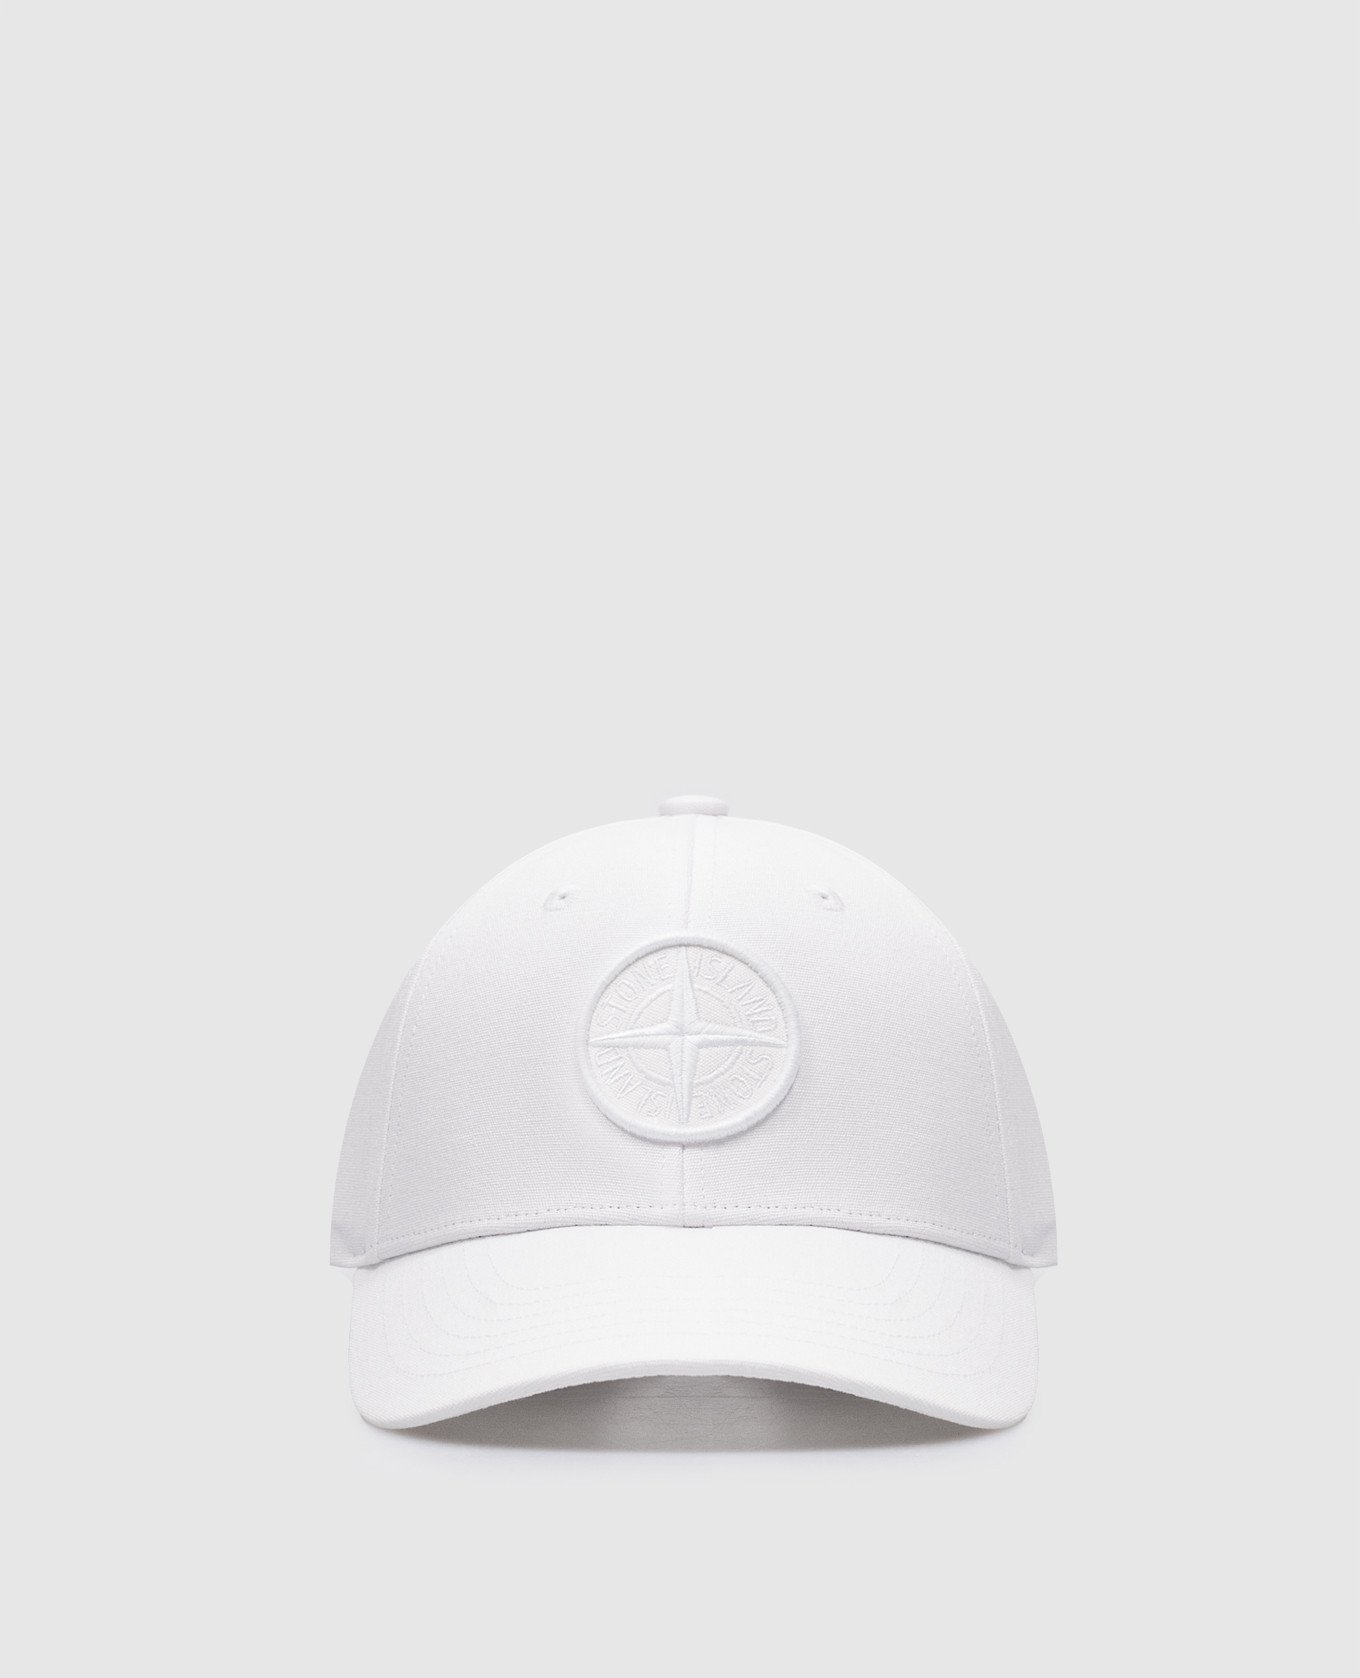 White cap with textured logo embroidery